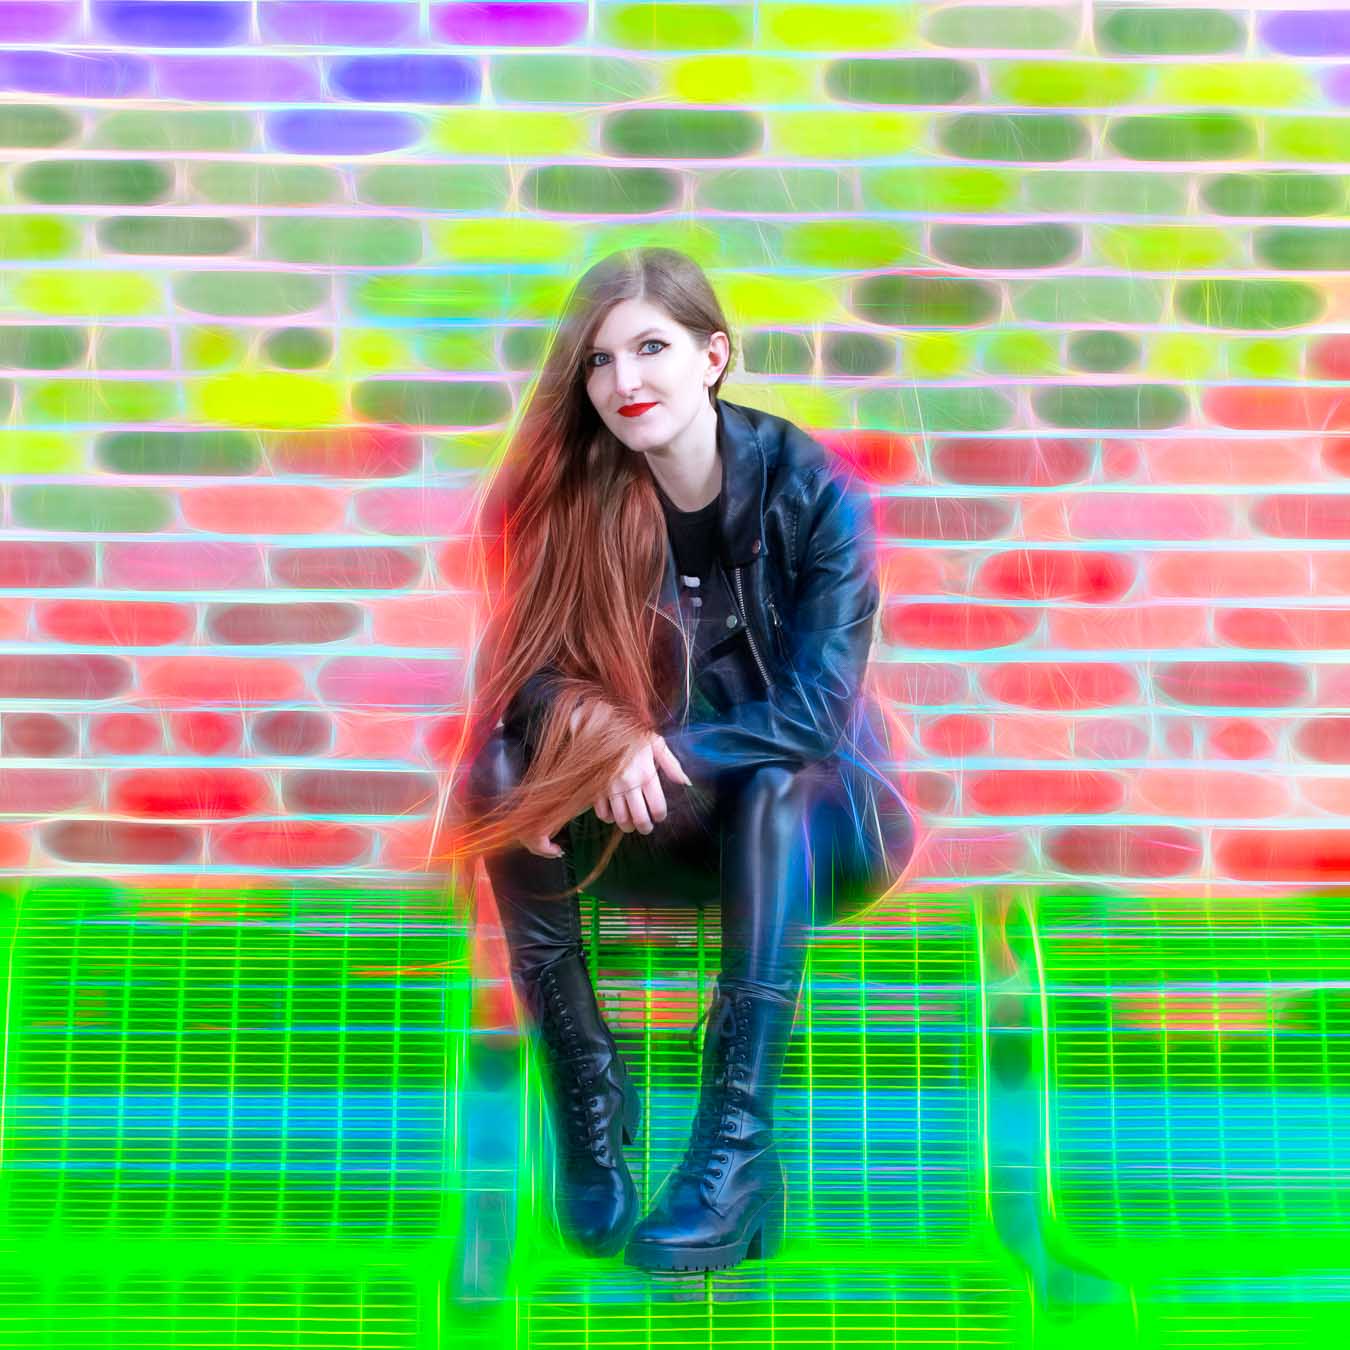 Redhead model with colorful background